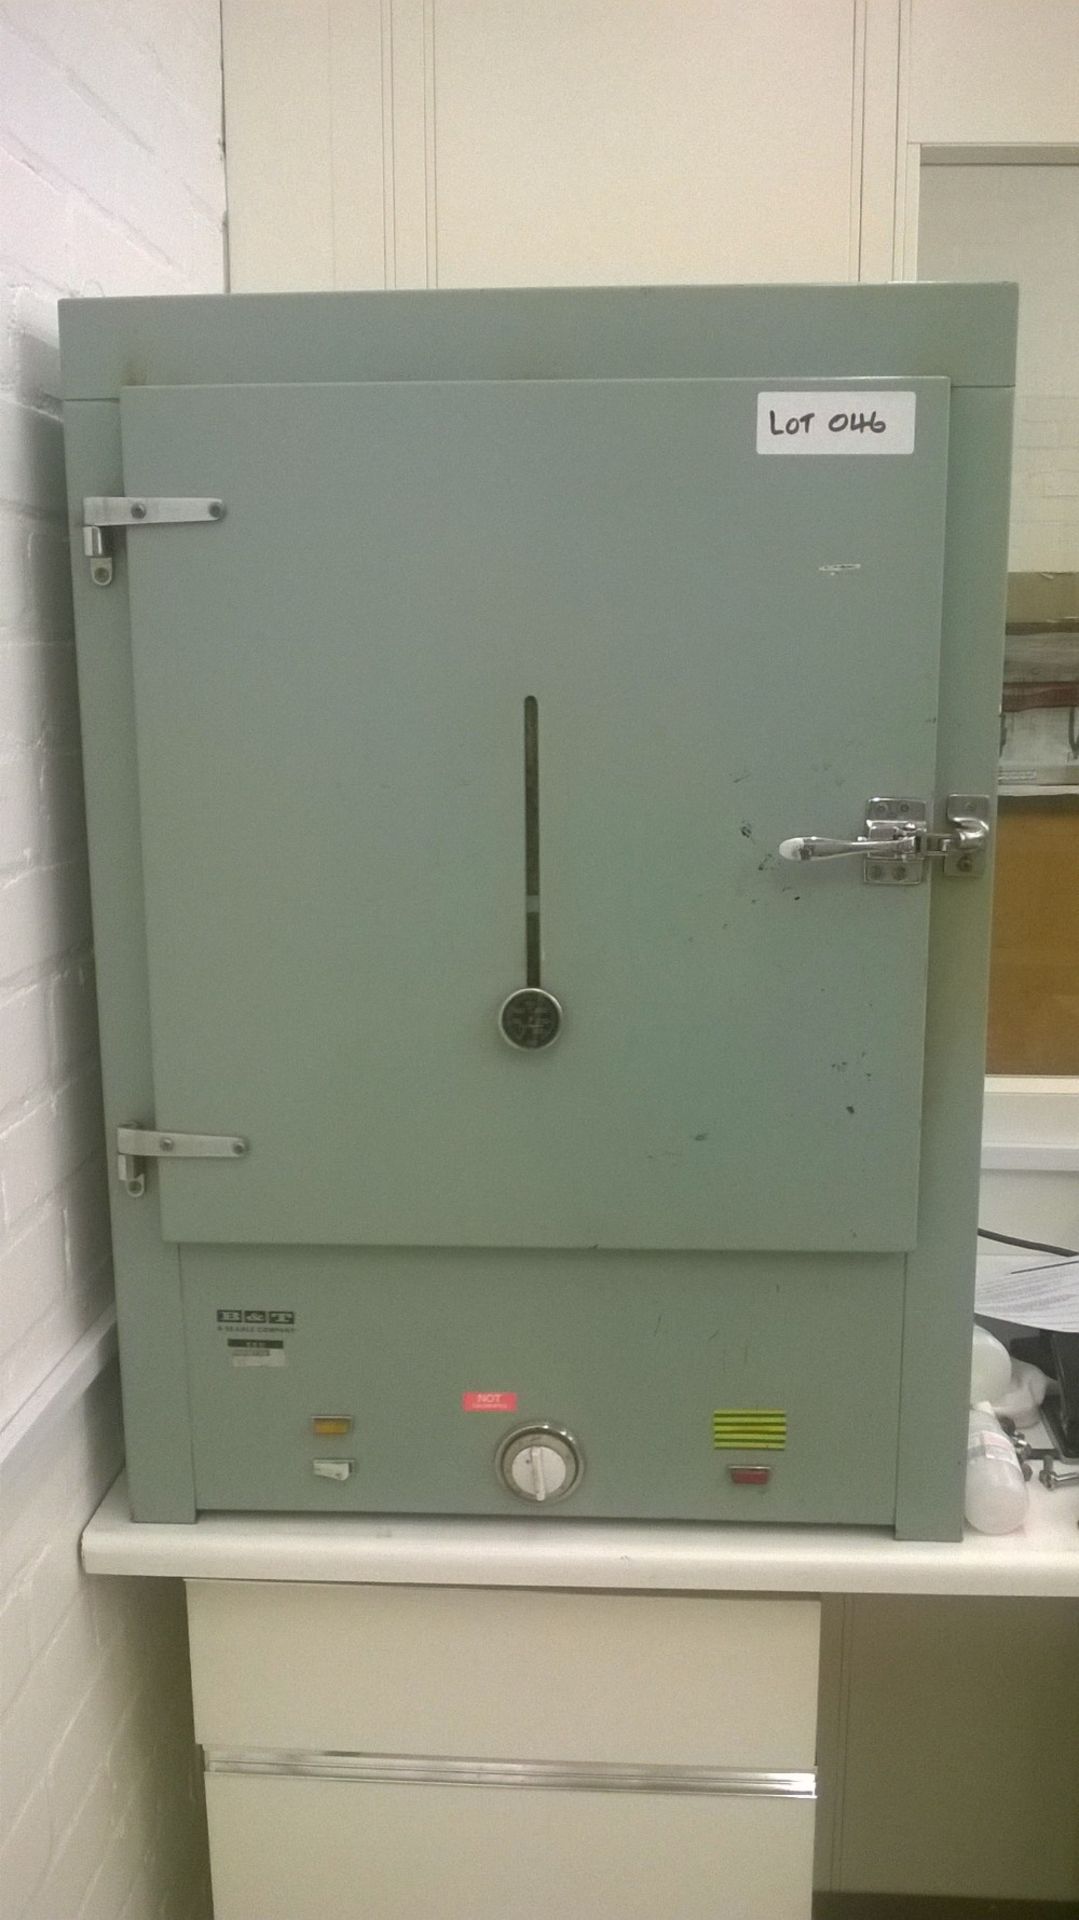 B&T lab oven - Image 2 of 8